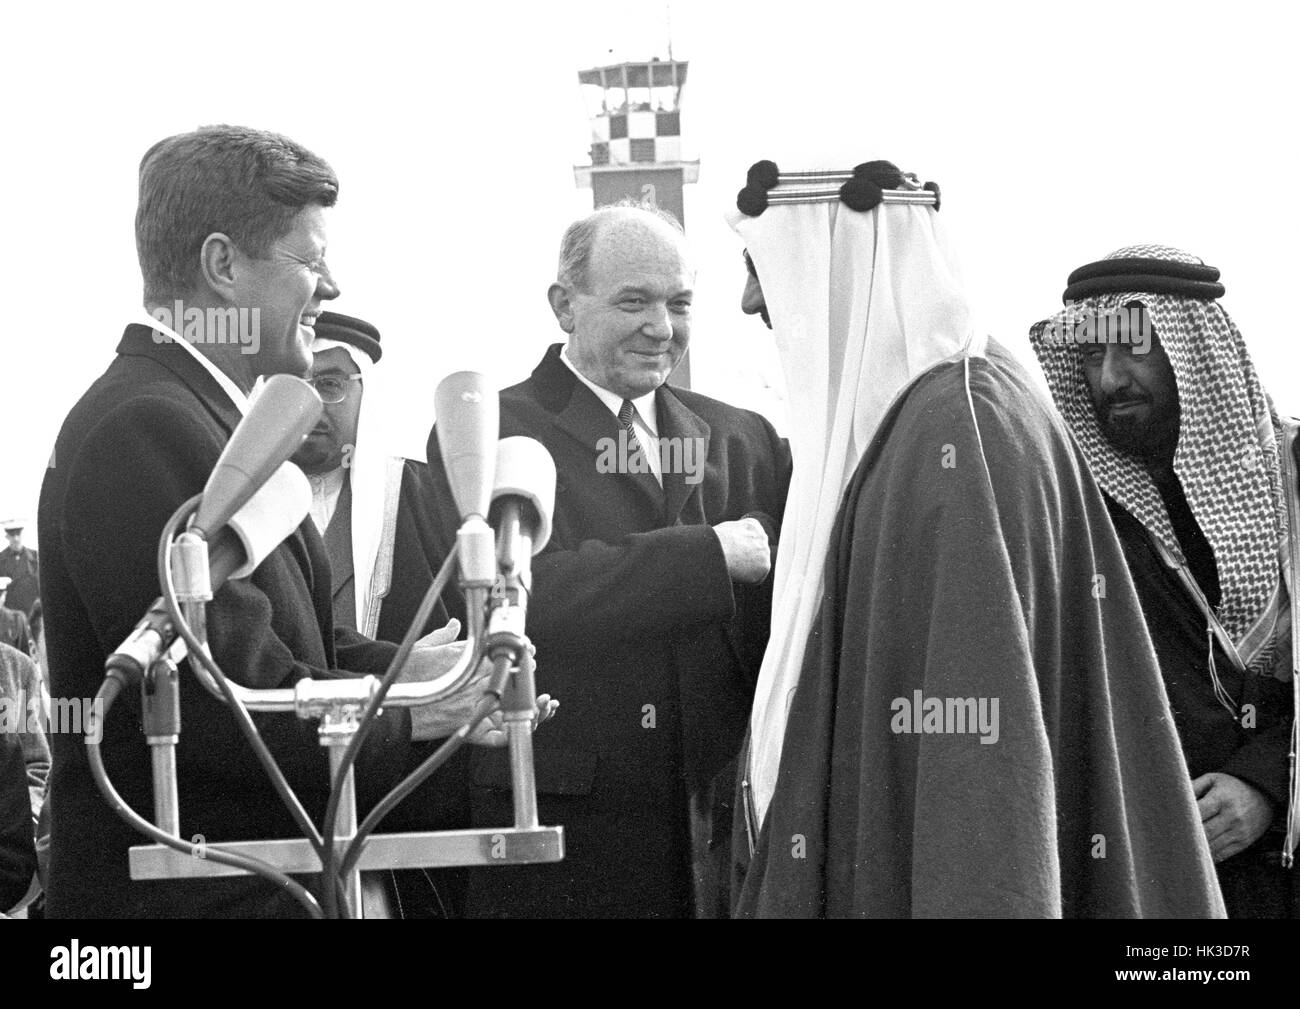 United States President John F. Kennedy, left, and US Secretary of State Dean Rusk, center left, welcome King Saud bin Abdulaziz Al Saud of Saudi Arabia, center right, to the United States following a ceremony at Andrews Air Force Base, Maryland on Februa Stock Photo